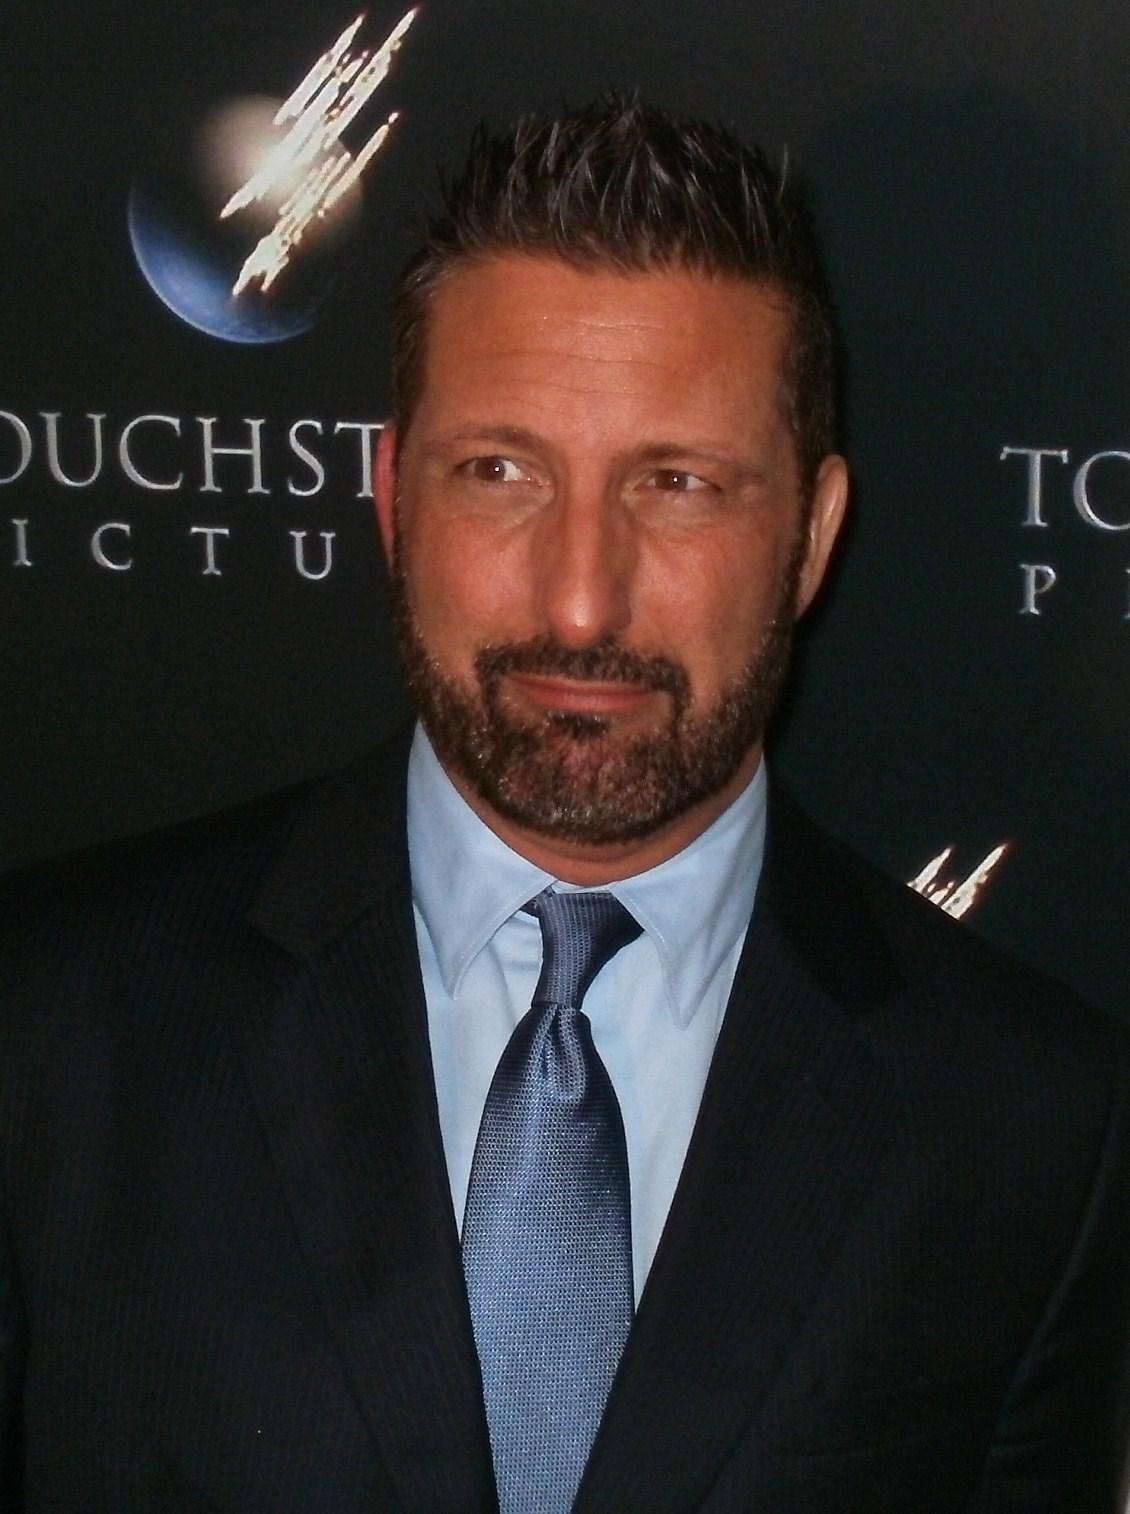 Adam DiSpirito to star on the small screen in special forces drama series due out late 2015. Photo used with permission.